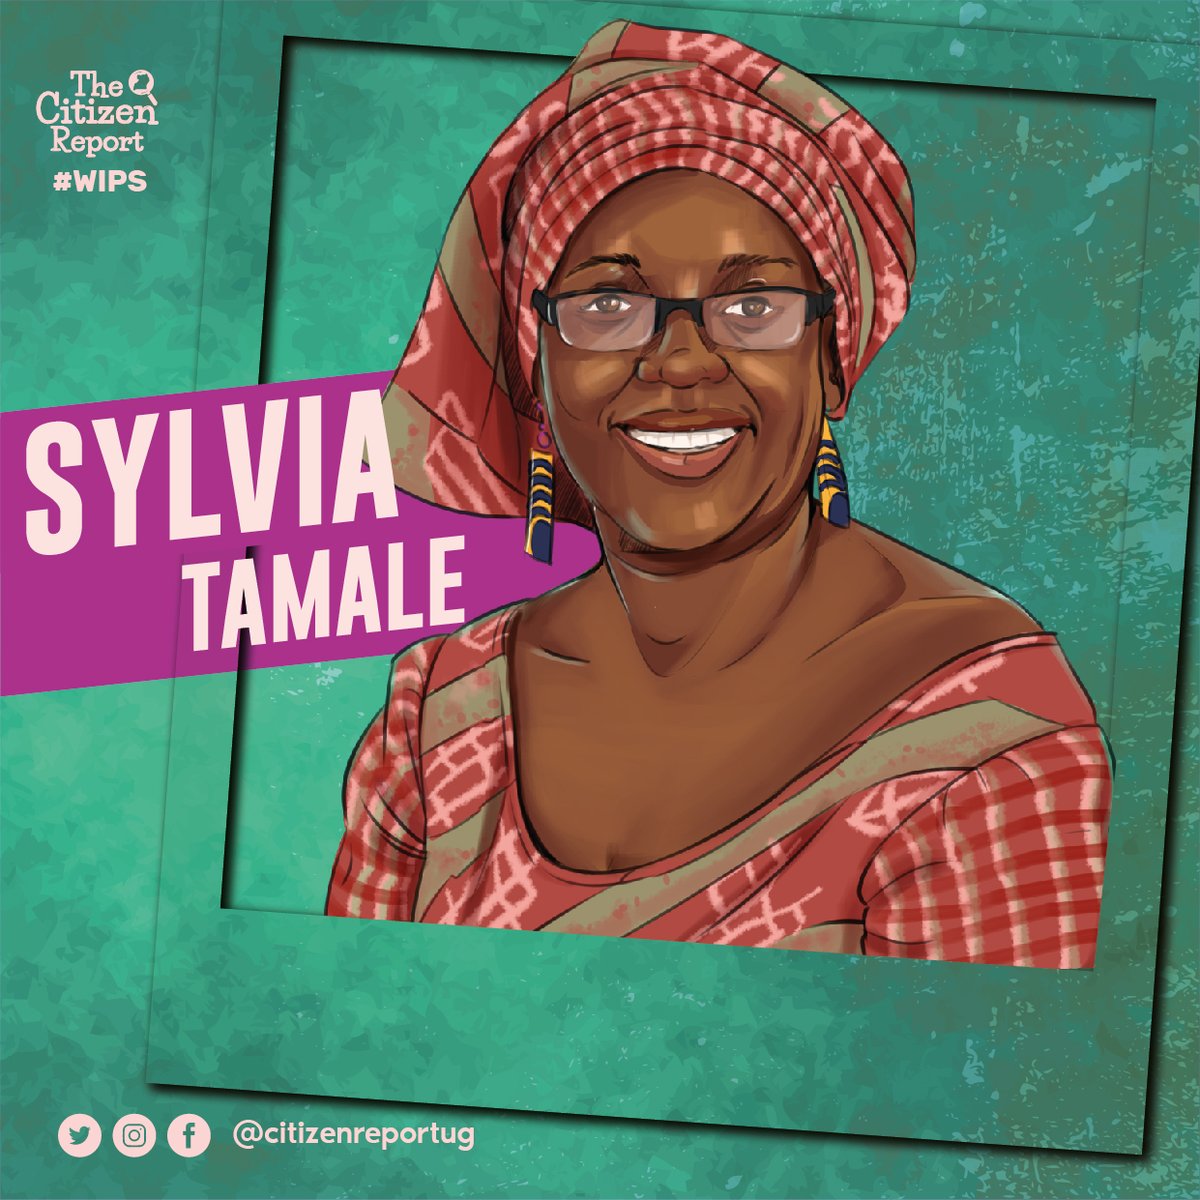 Sylvia Tamale was born in 1962. She studied at Budo Junior School (1969-1975), Gayaza High School (1976-1982), and then joined Makerere University in 1982 where she completed her Bachelor of Laws degree with honours. In 1988, she completed a Master of Laws degree at Harvard…